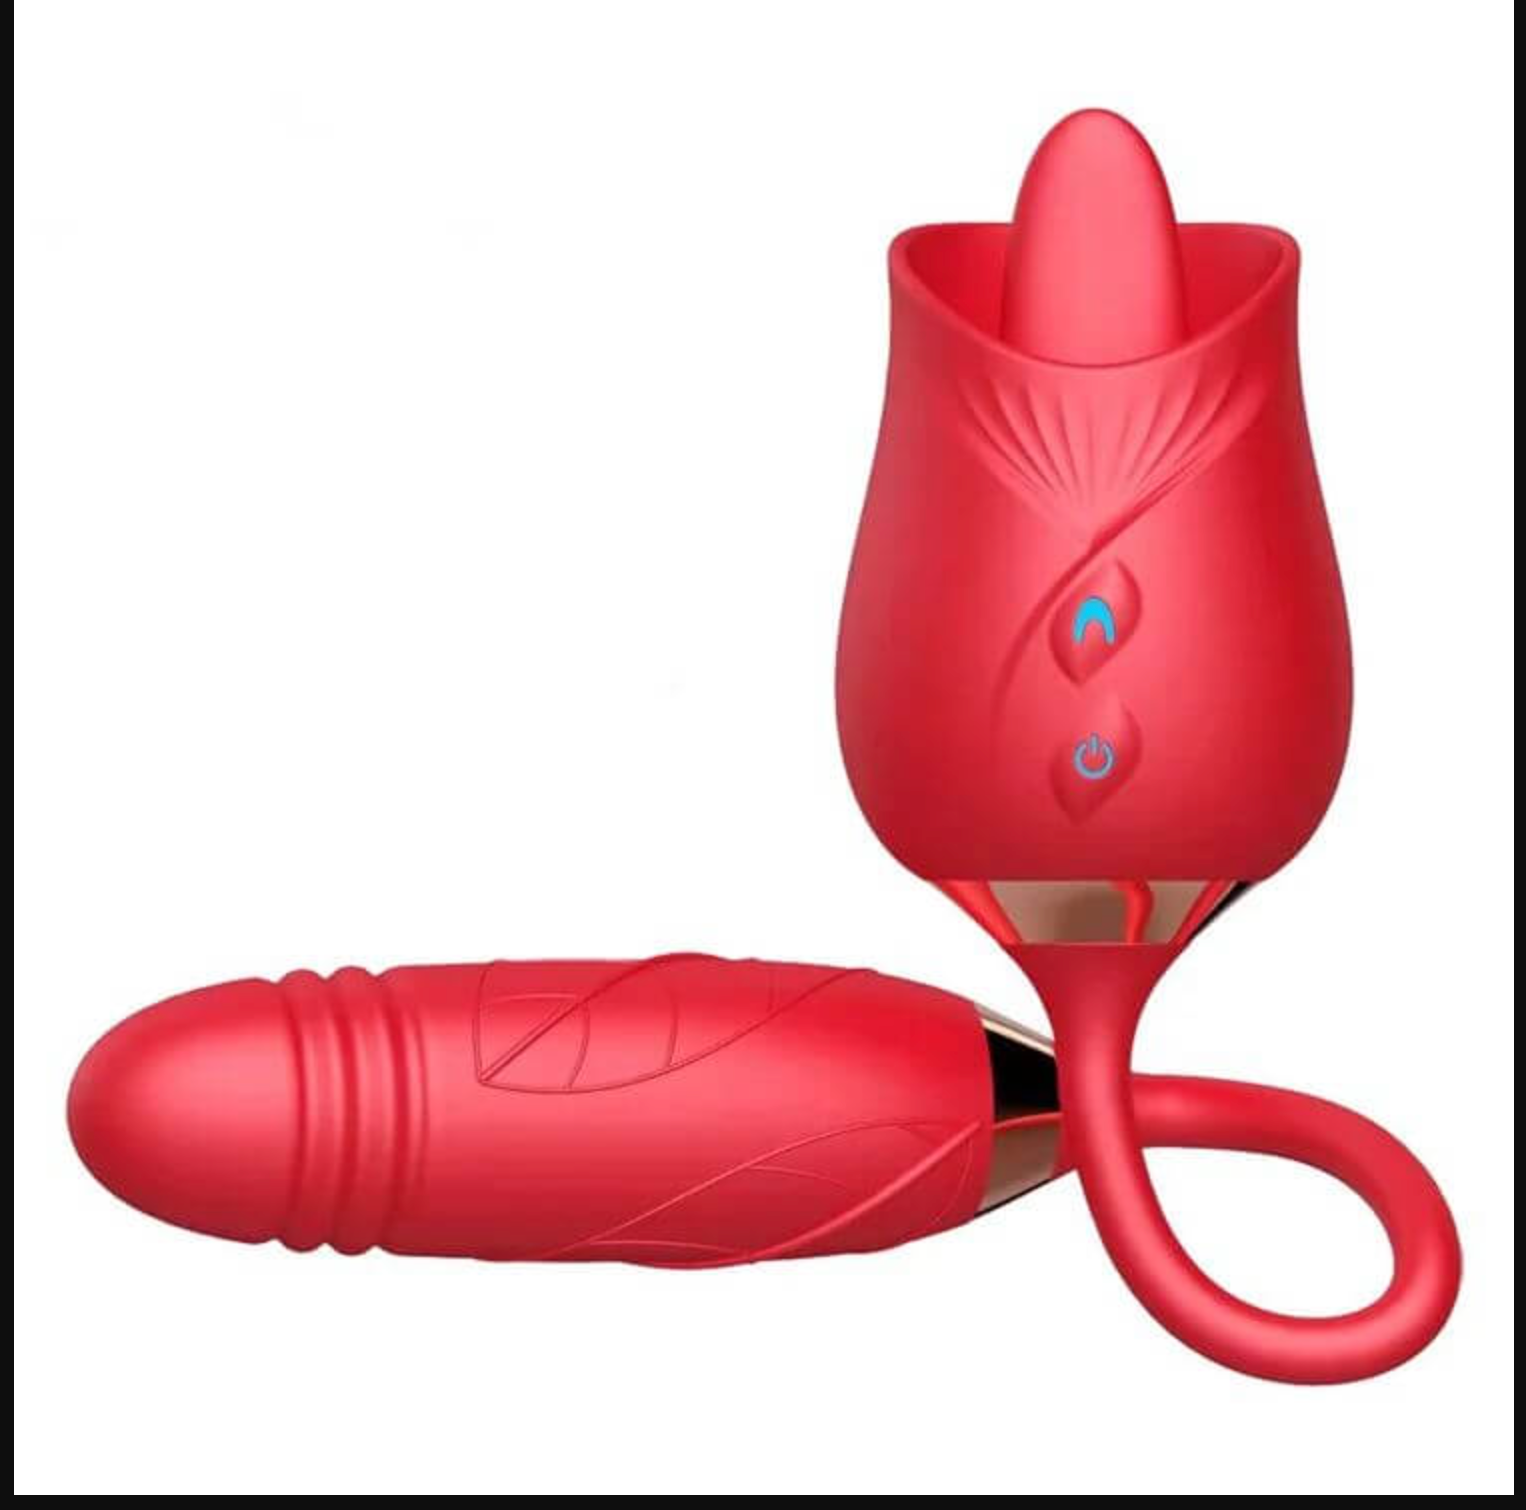 Thrusting Sucking Rose Toy Vibrator Sex Toy With Licking Tongue